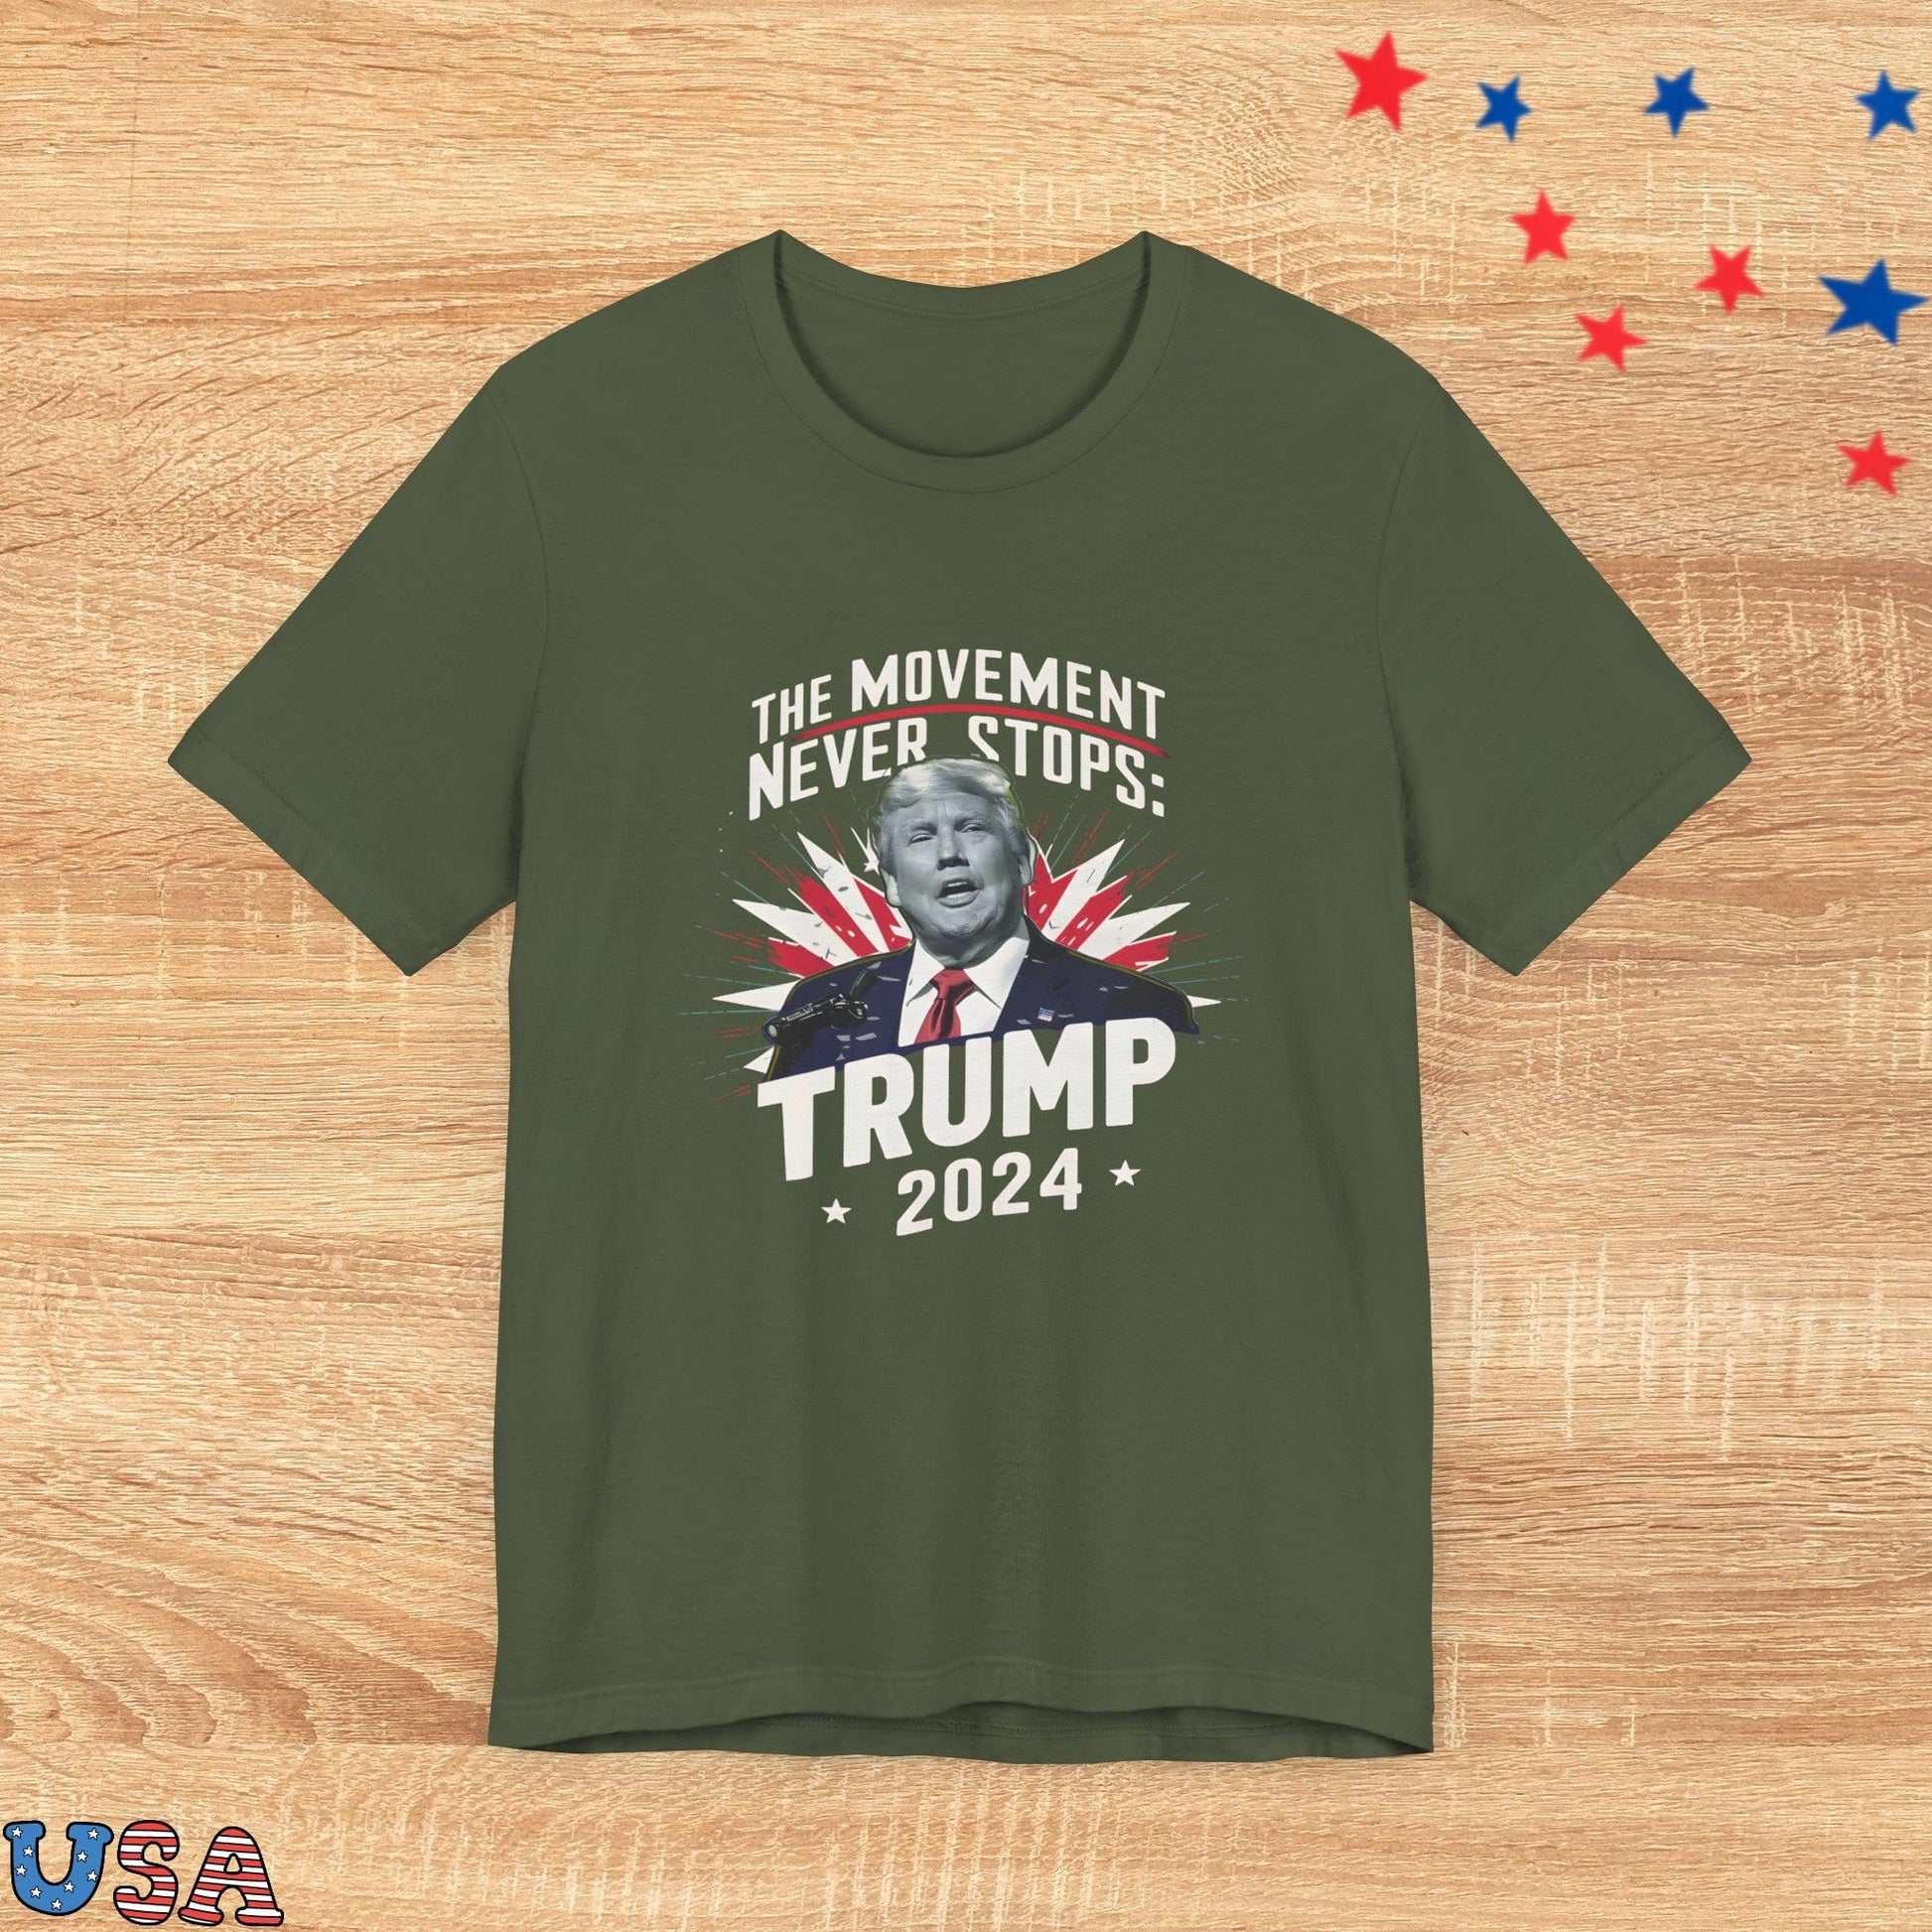 patriotic stars T-Shirt Military Green / XS The Movement Never Stops